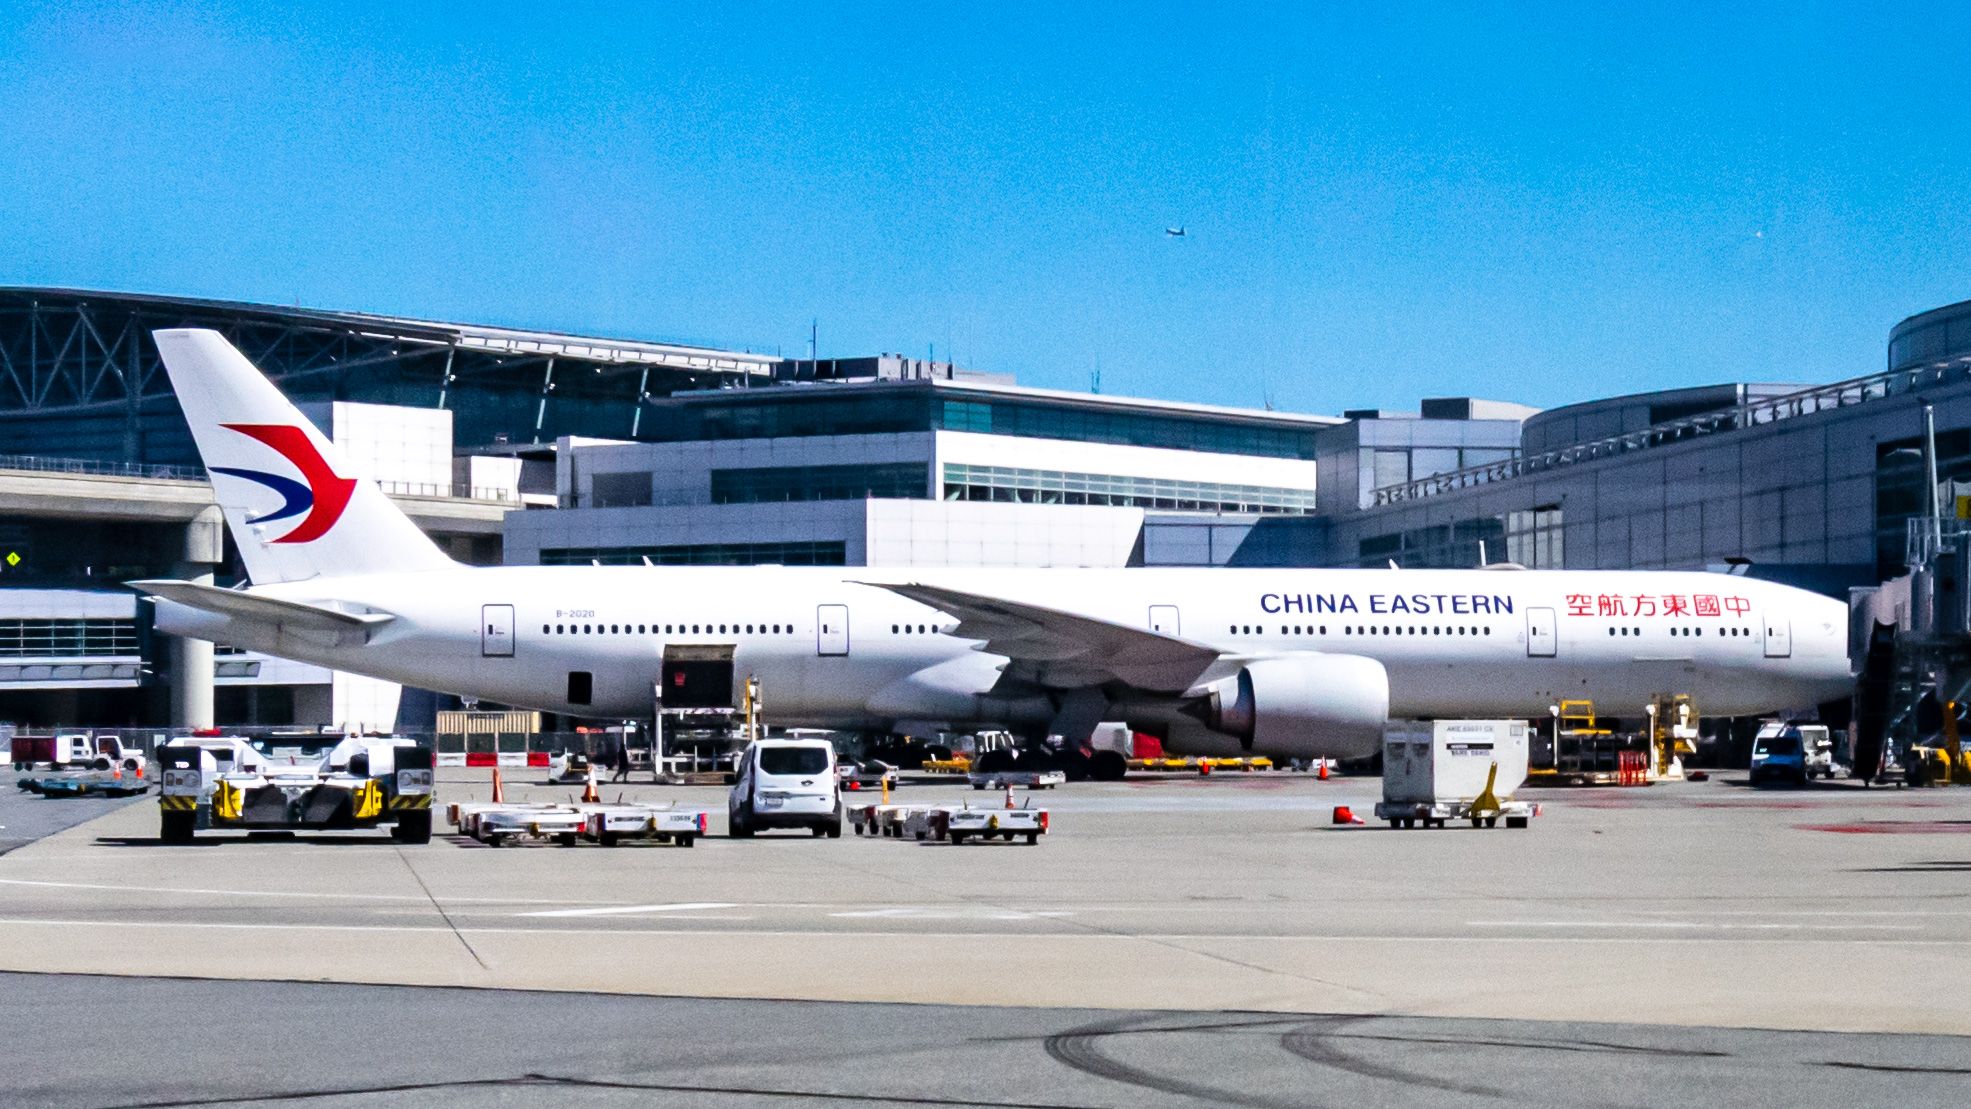 A China Eastern 777-300ER at the SFO Gate